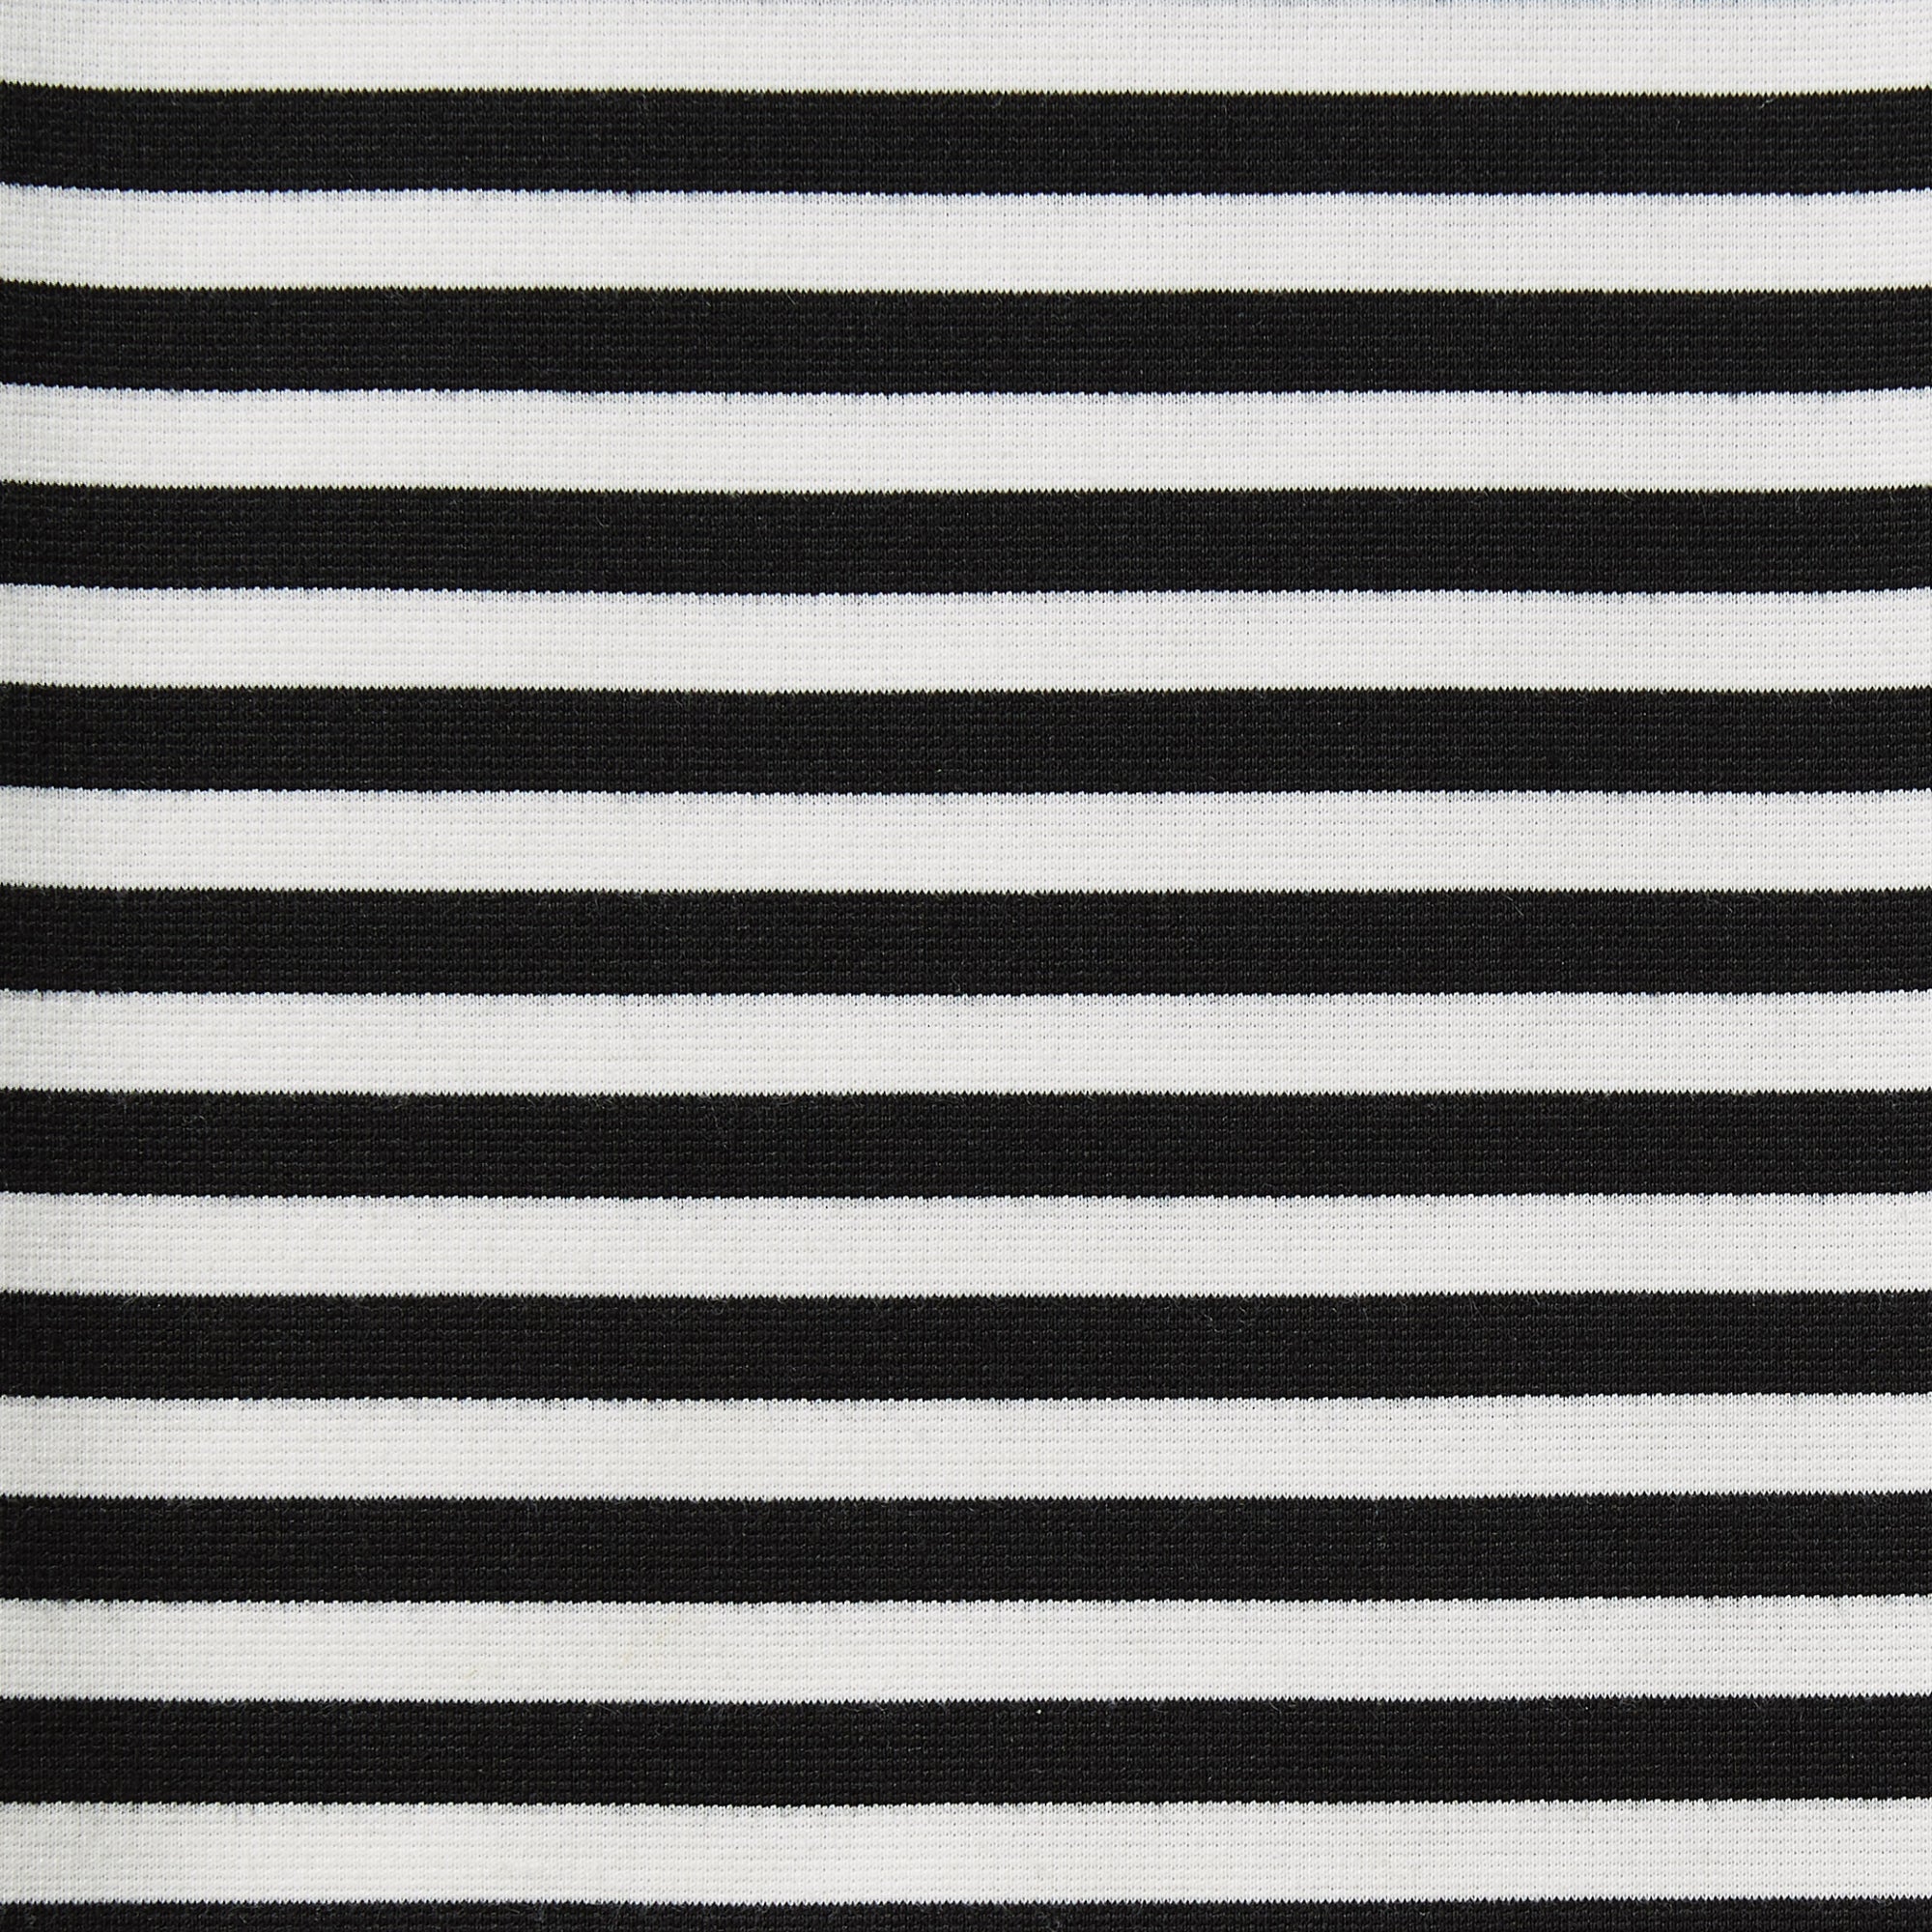 Displaying Breton with black and white shaded classic stripes on heavy weight ponte knit stretch polyester with spandex